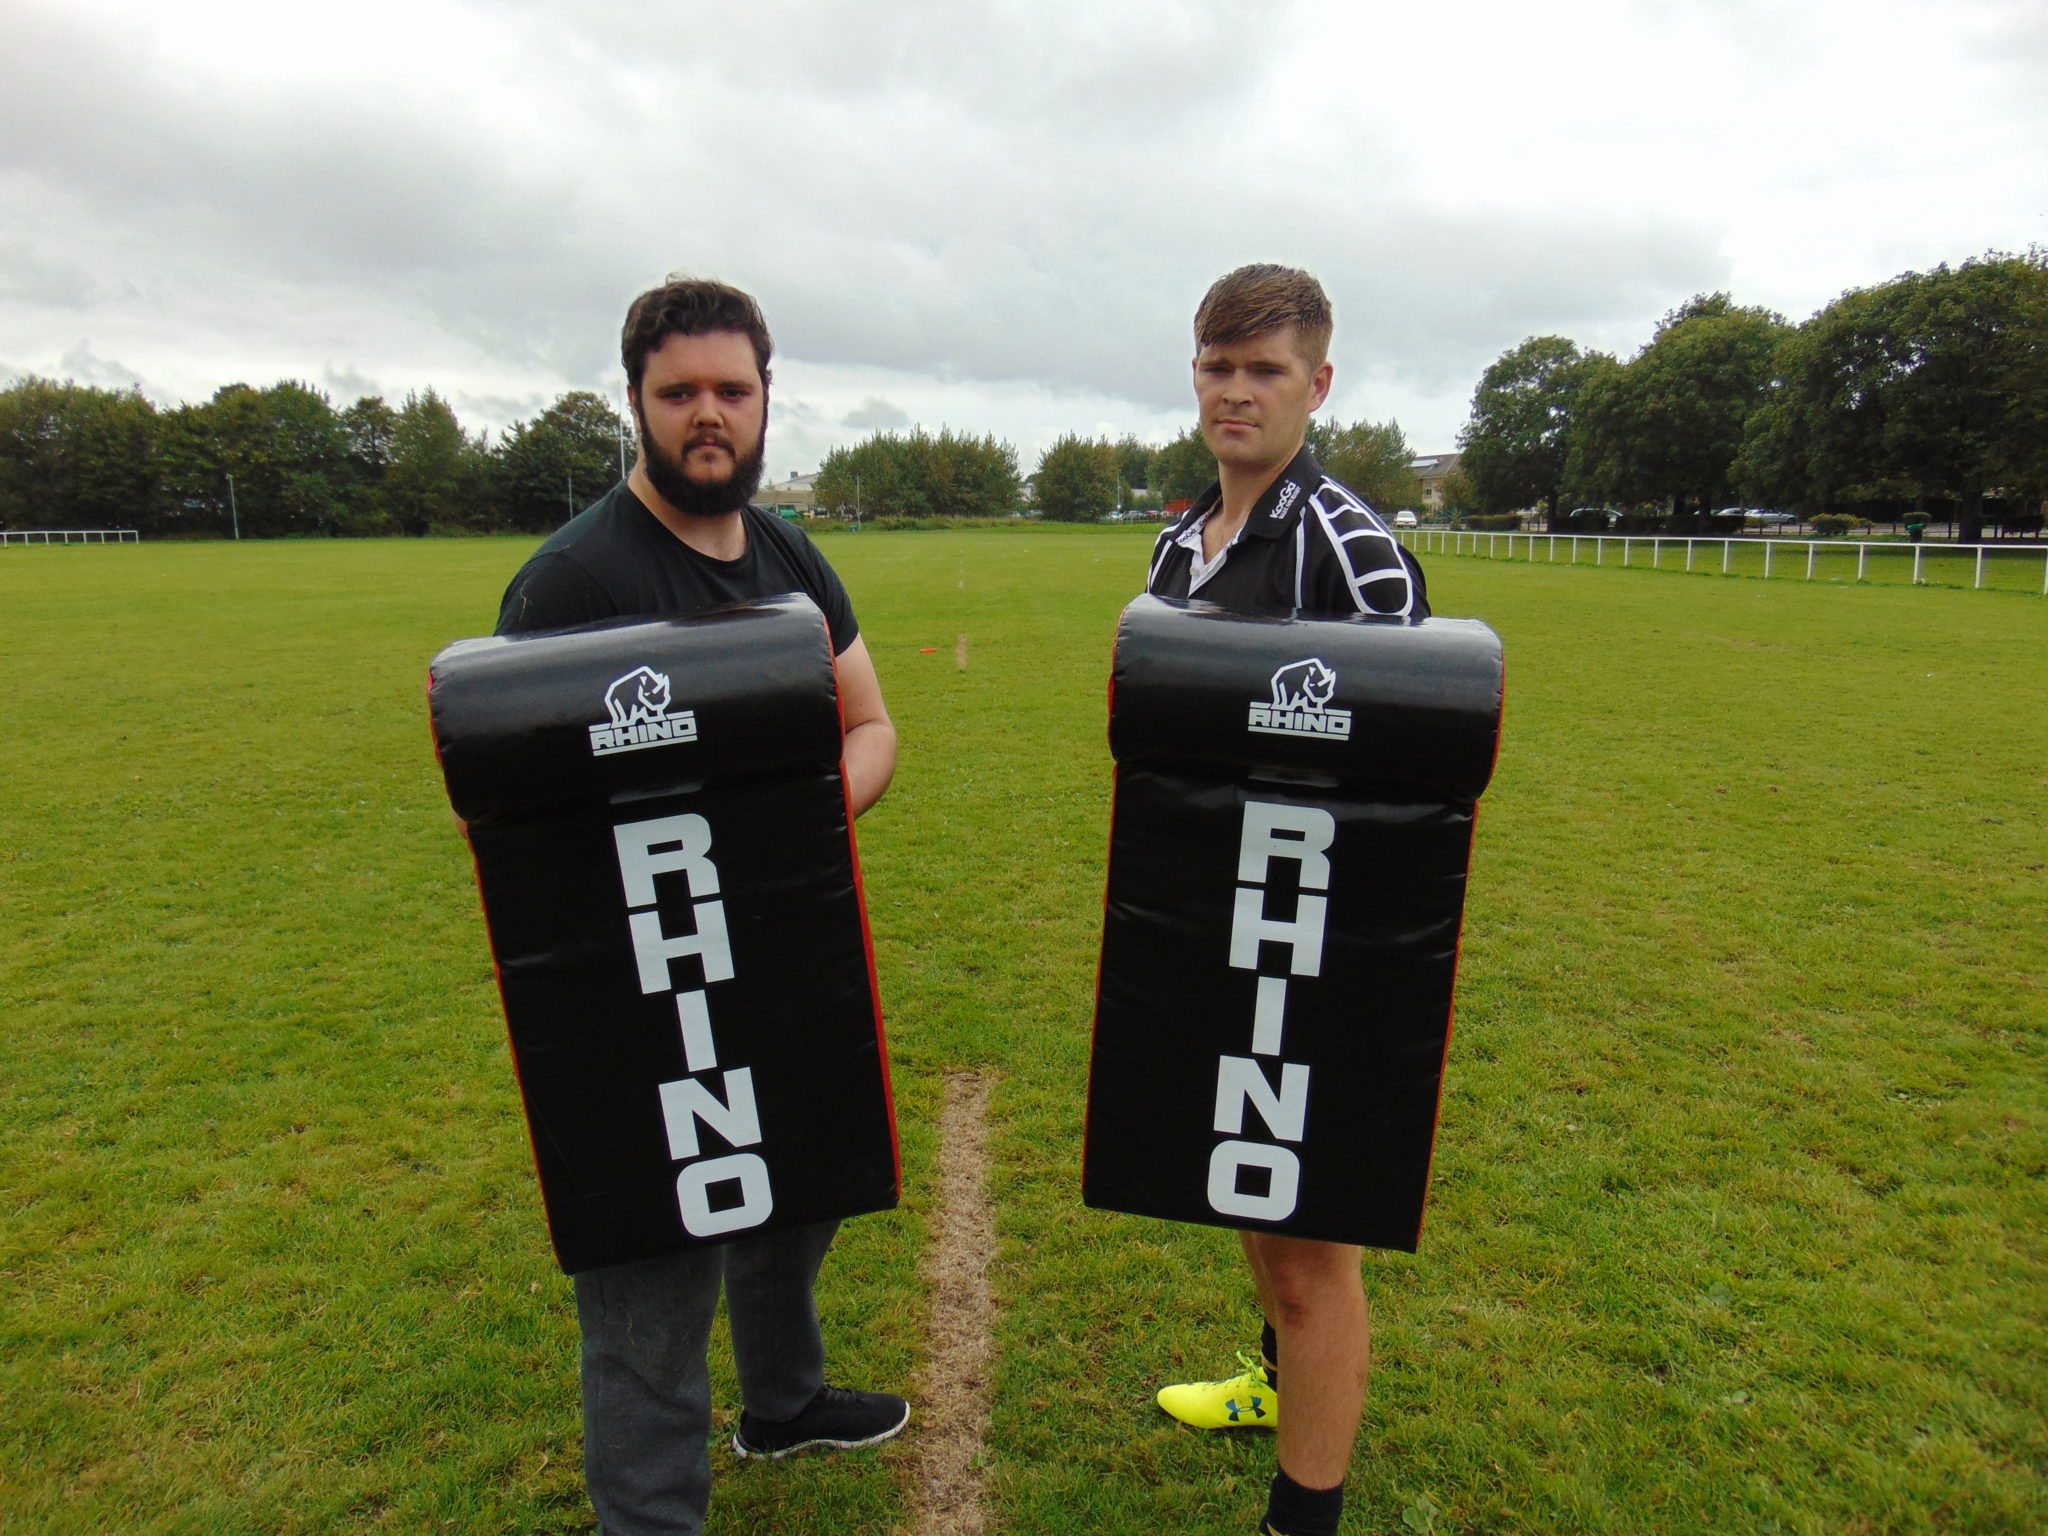 Homelessness rugby - School of Hard Knocks